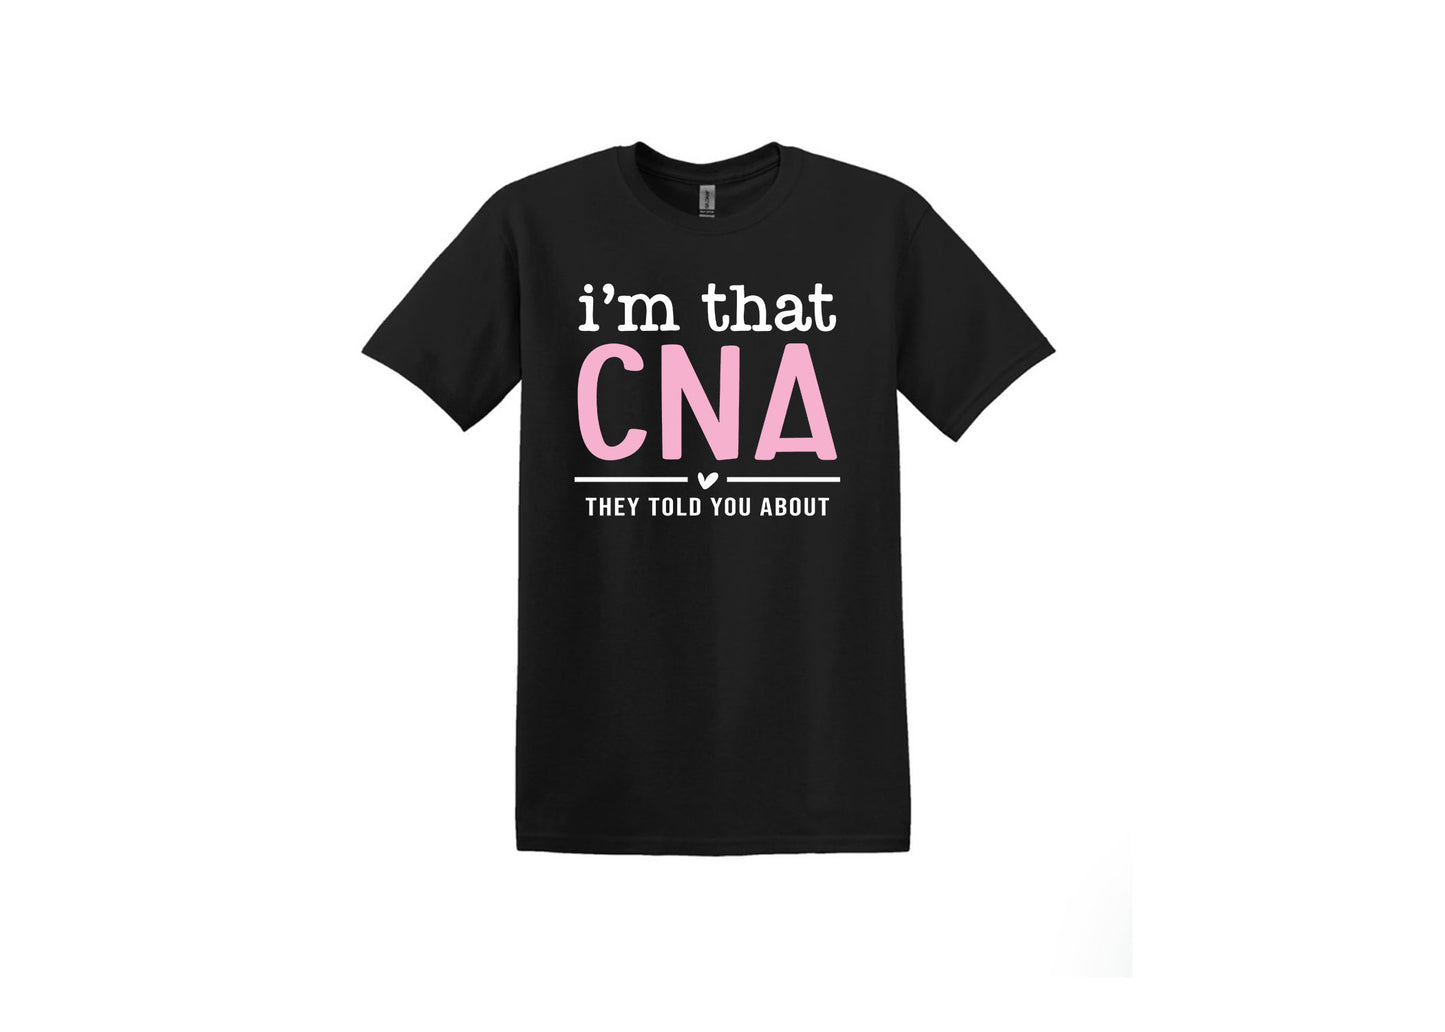 I'm THAT CNA they told you about